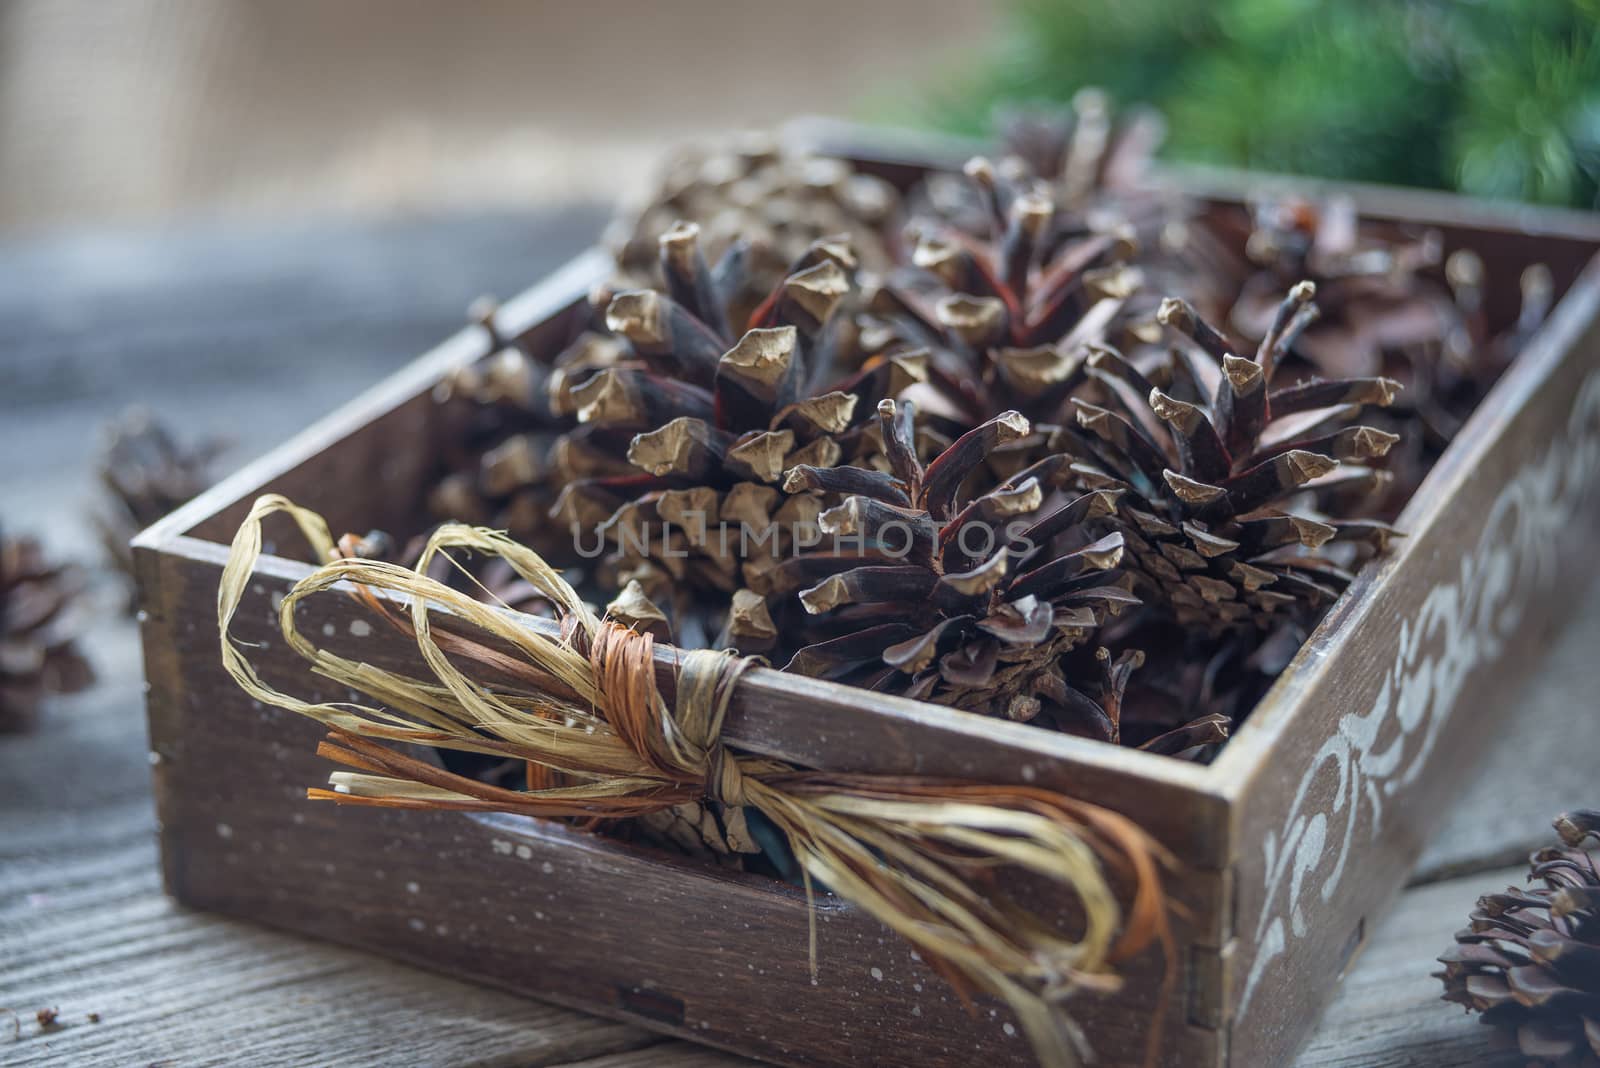 Christmas concept: full wooden box of pine cones and red holly berries and spruce branches on the background of old unpainted wooden boards